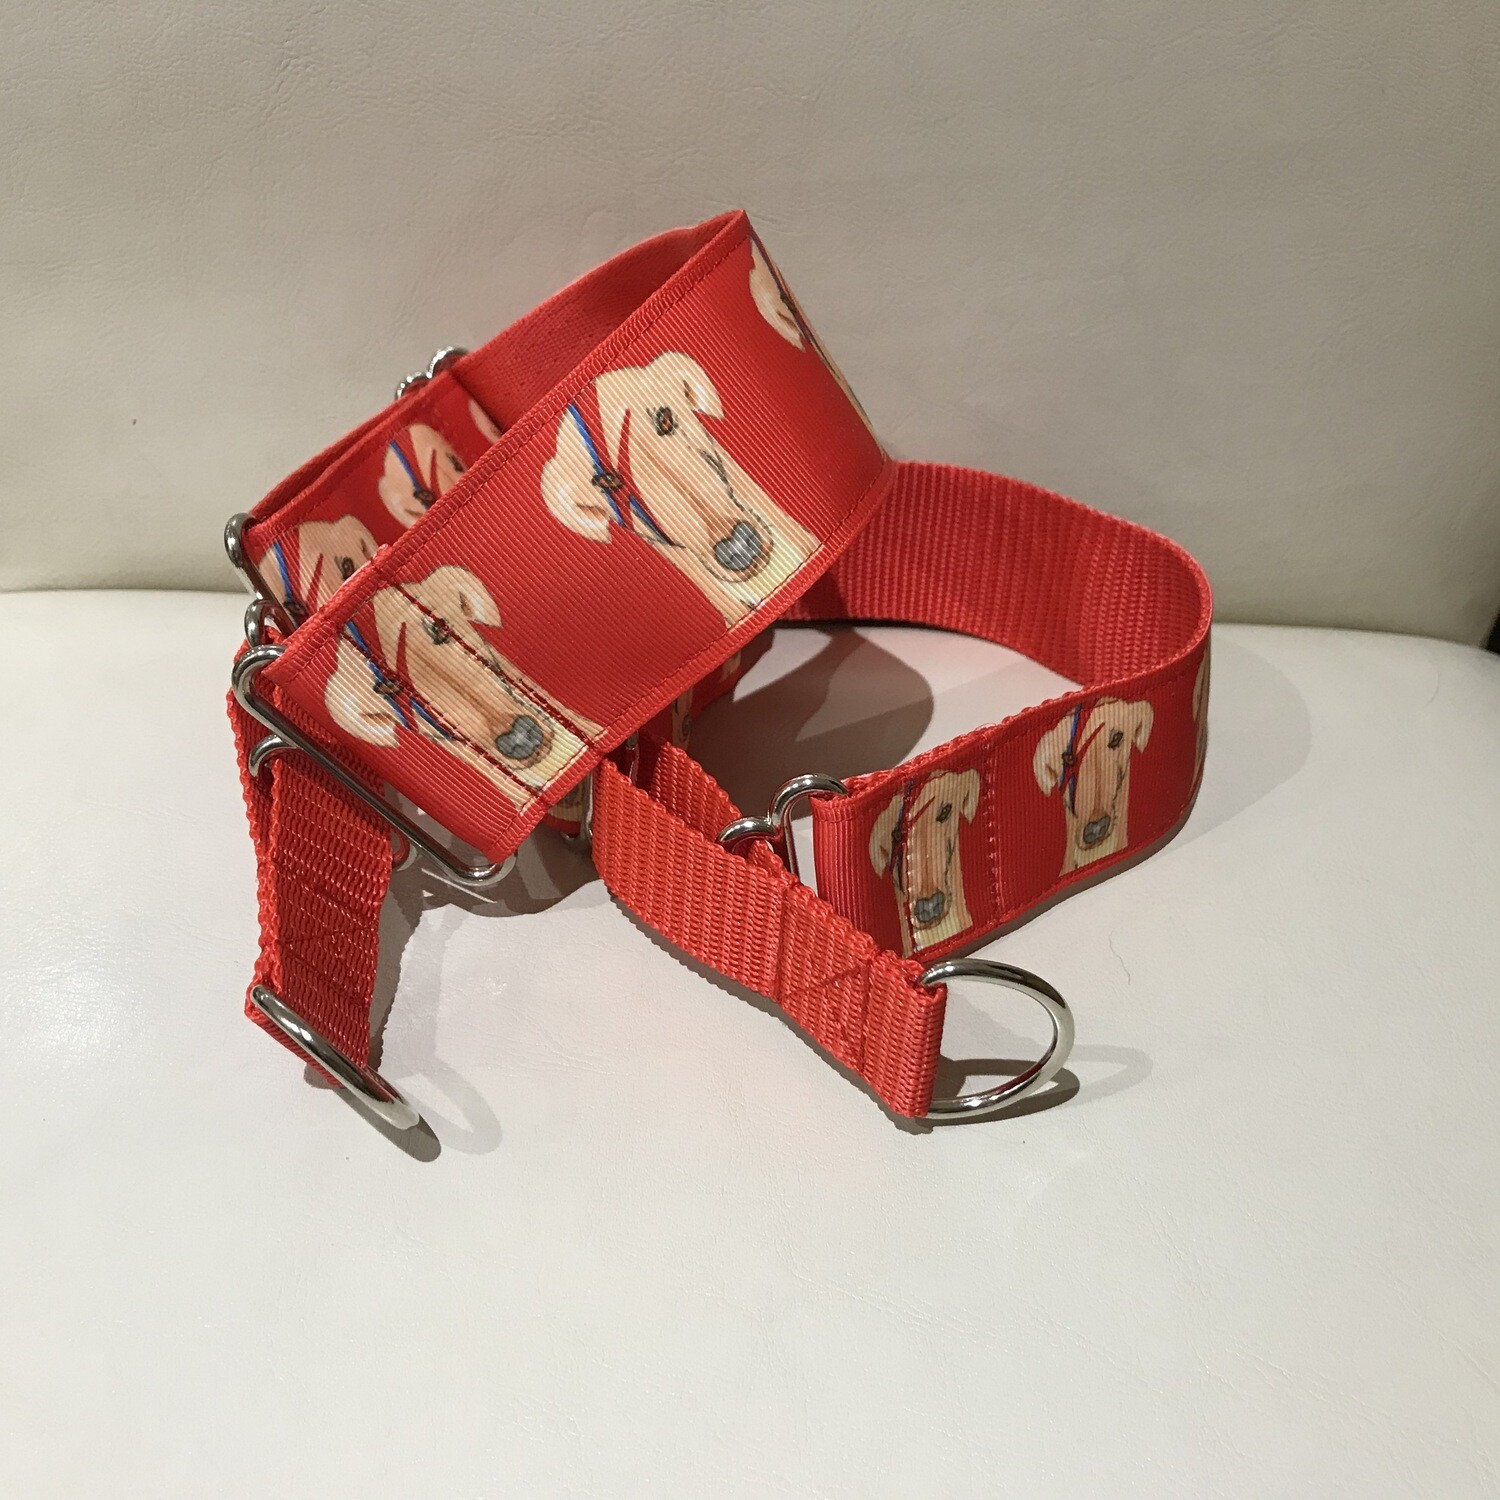 LPDC - Martingale Collar and Lead - Red Ziggy Stardog on Grosgrain Ribbon - Unique Collars designed by me!!